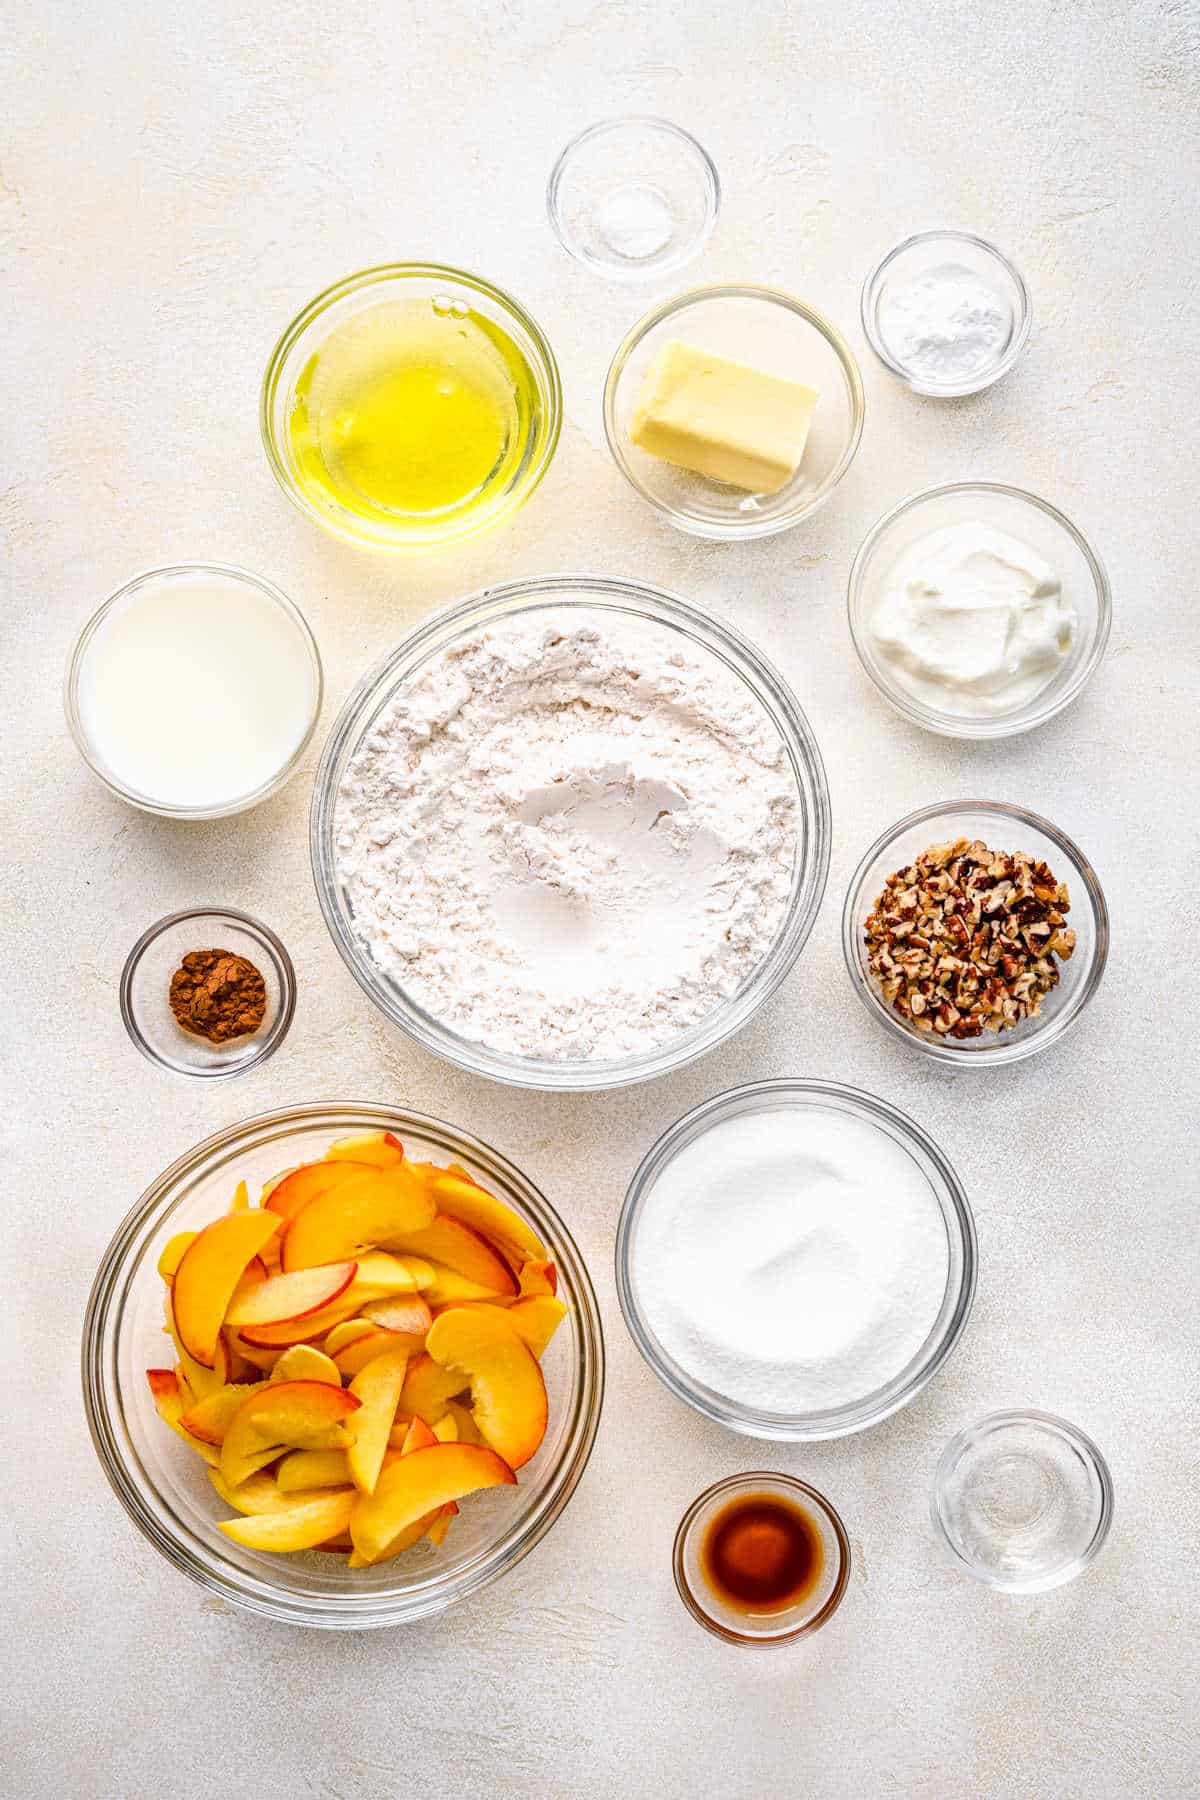 Ingredients for peach cake in dishes.